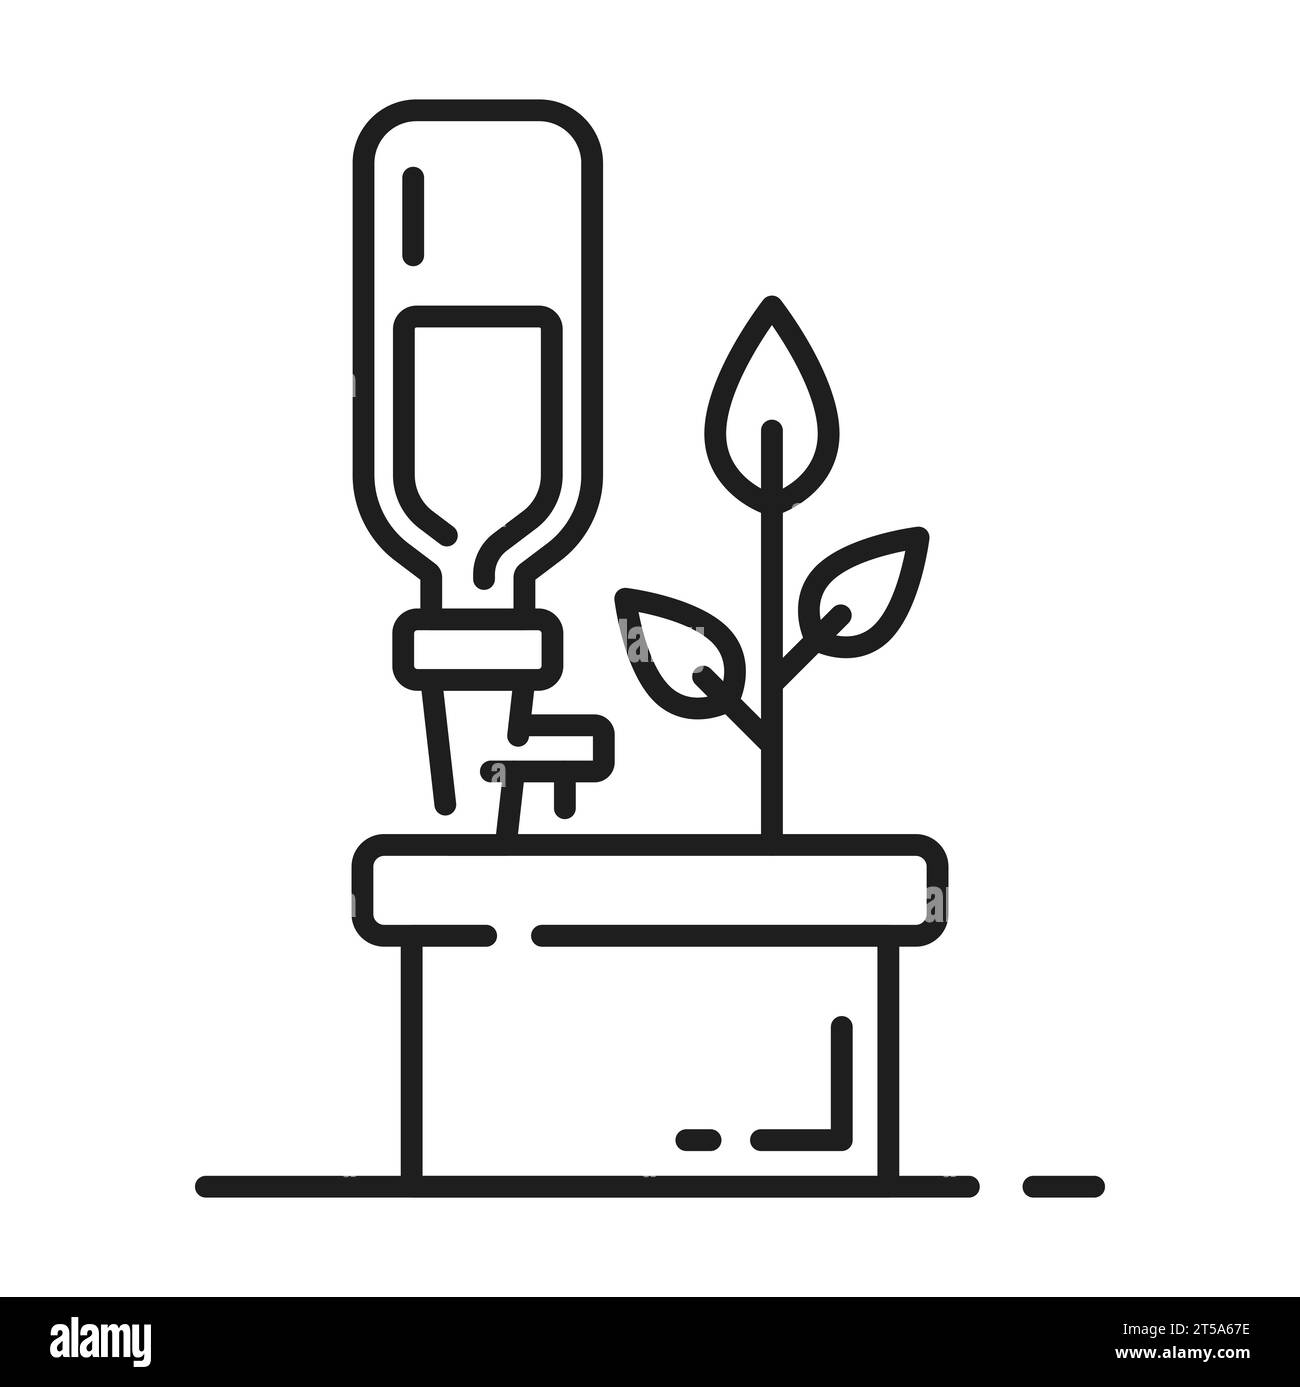 Plant drip irrigation and watering icon. Seedling watering technology, farmland aquaponics automatic system or sprout water drip equipment line vector symbol. Agriculture irrigation pictogram or icon Stock Vector